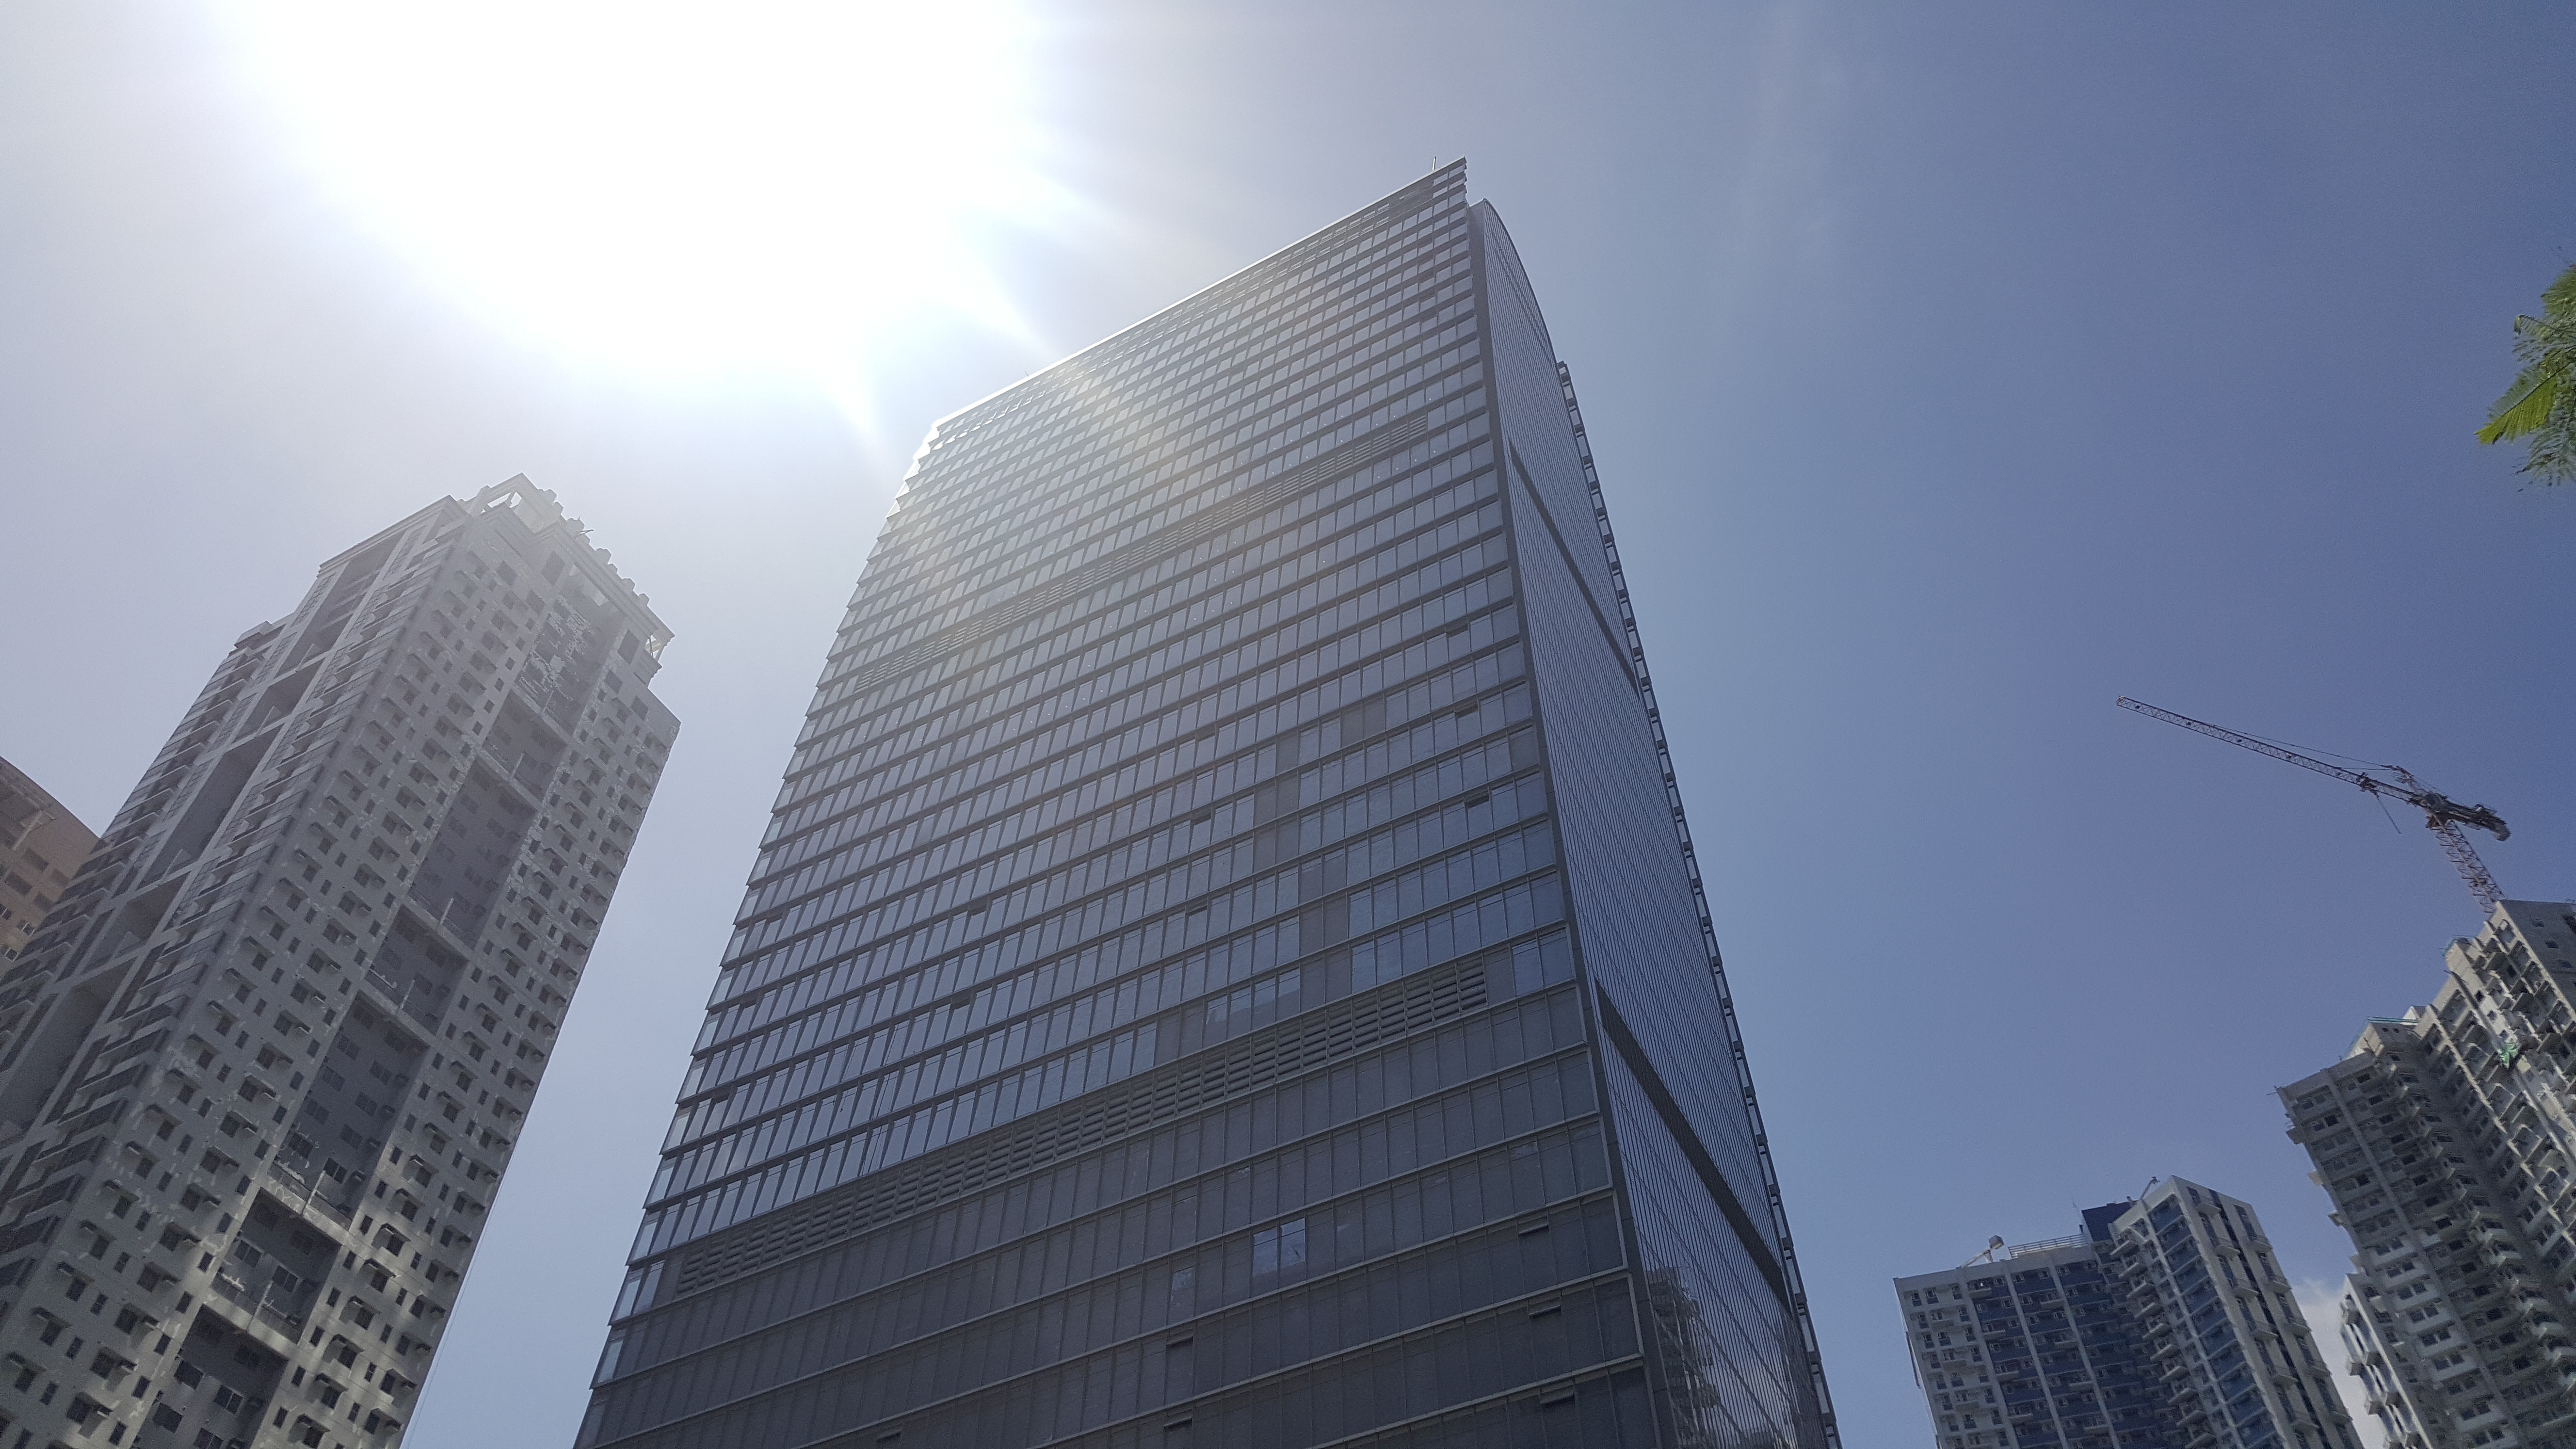 435 sqm Office Space For Rent at The Finance Centre in BGC, Taguig